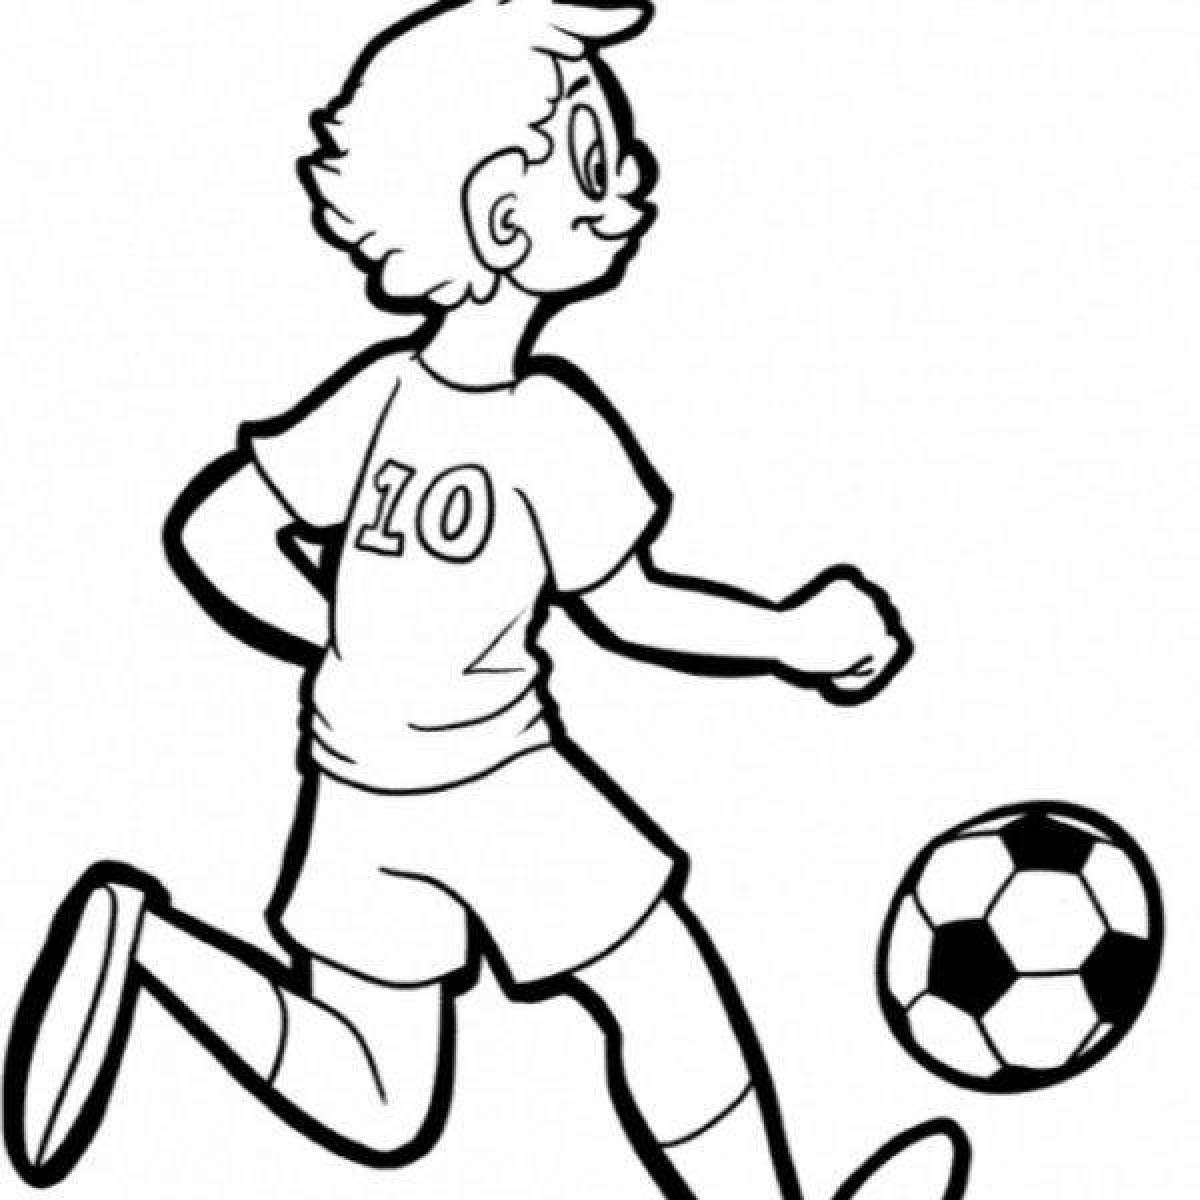 Brilliant soccer player coloring pages for kids